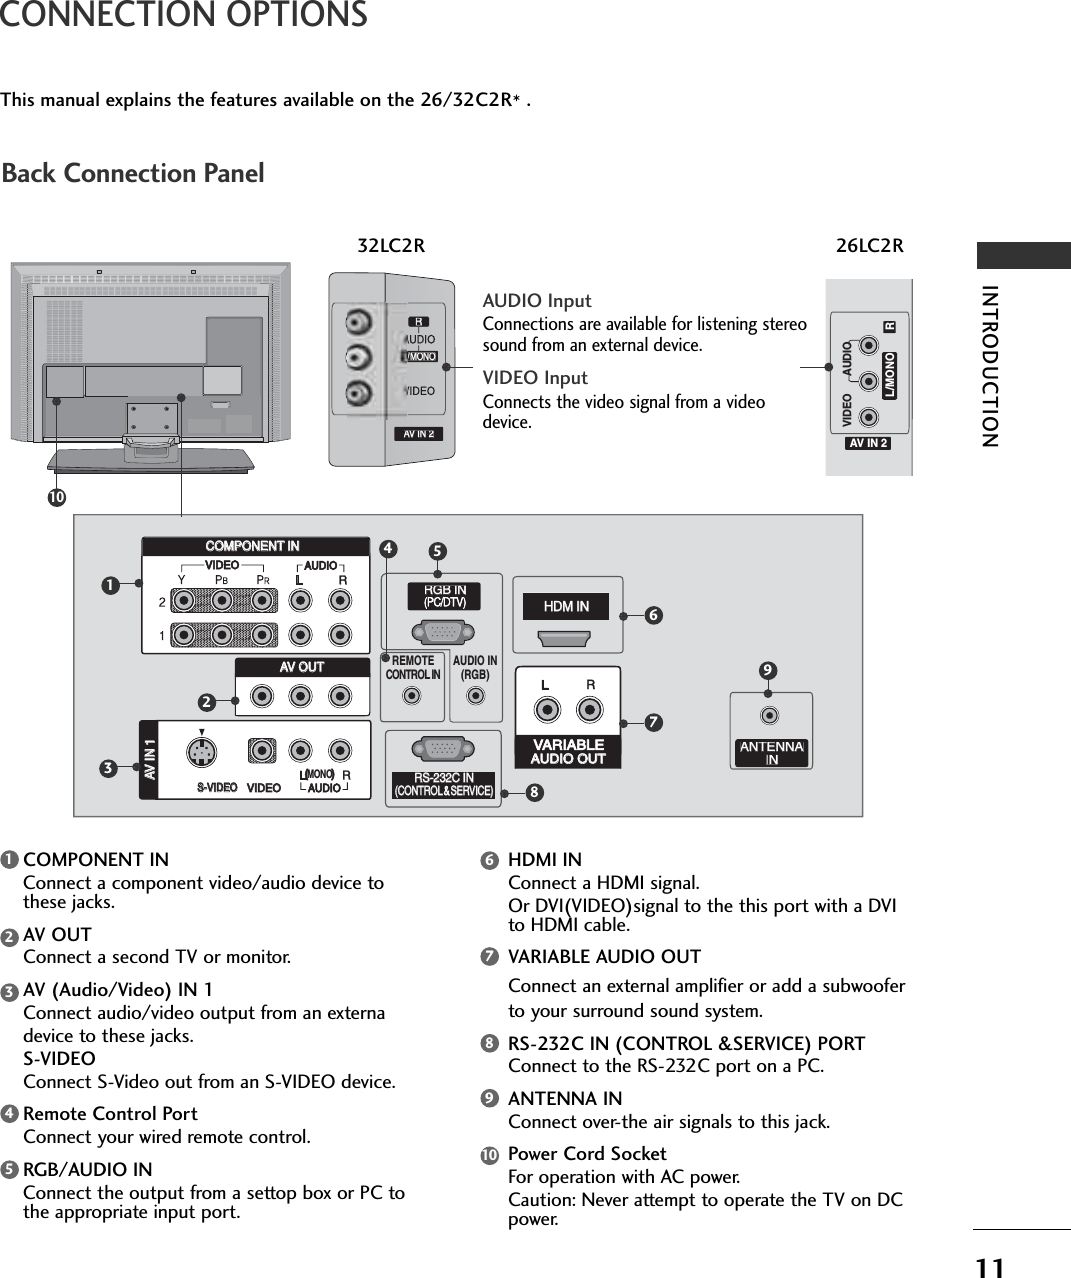 11CONNECTION OPTIONSINTRODUCTIONThis manual explains the features available on the 26/32C2R*.VIDEOAV IN 2L/MONO RAV IN 2/MONORAUDIOREMOTECONTROL INAUDIO IN(RGB)MONO( )AUDIORGB INRS-232C INRS-232C IN(CONTROL(CONTROL&amp;SERVICE)SERVICE)HDM INHDM INANTENNAINVIDEOVIDEOS-VIDEOS-VIDEOAV IN 1AV IN 1AUDIO OUTAUDIO OUTVARIABLEVIDEOAUDIOCOMPONENT INCOMPONENT INAV OUTAV OUTBack Connection PanelAUDIO InputConnections are available for listening stereosound from an external device.VIDEO InputConnects the video signal from a videodevice.COMPONENT INConnect a component video/audio device tothese jacks.AV OUTConnect a second TV or monitor.AV (Audio/Video) IN 1 Connect audio/video output from an externadevice to these jacks.S-VIDEO Connect S-Video out from an S-VIDEO device.Remote Control PortConnect your wired remote control.RGB/AUDIO INConnect the output from a settop box or PC tothe appropriate input port.HDMI INConnect a HDMI signal.Or DVI(VIDEO)signal to the this port with a DVIto HDMI cable.VARIABLE AUDIO OUTConnect an external amplifier or add a subwooferto your surround sound system.RS-232C IN (CONTROL &amp;SERVICE) PORTConnect to the RS-232C port on a PC.ANTENNA INConnect over-the air signals to this jack.Power Cord SocketFor operation with AC power. Caution: Never attempt to operate the TV on DCpower.123176891023455946781032LC2R 26LC2R